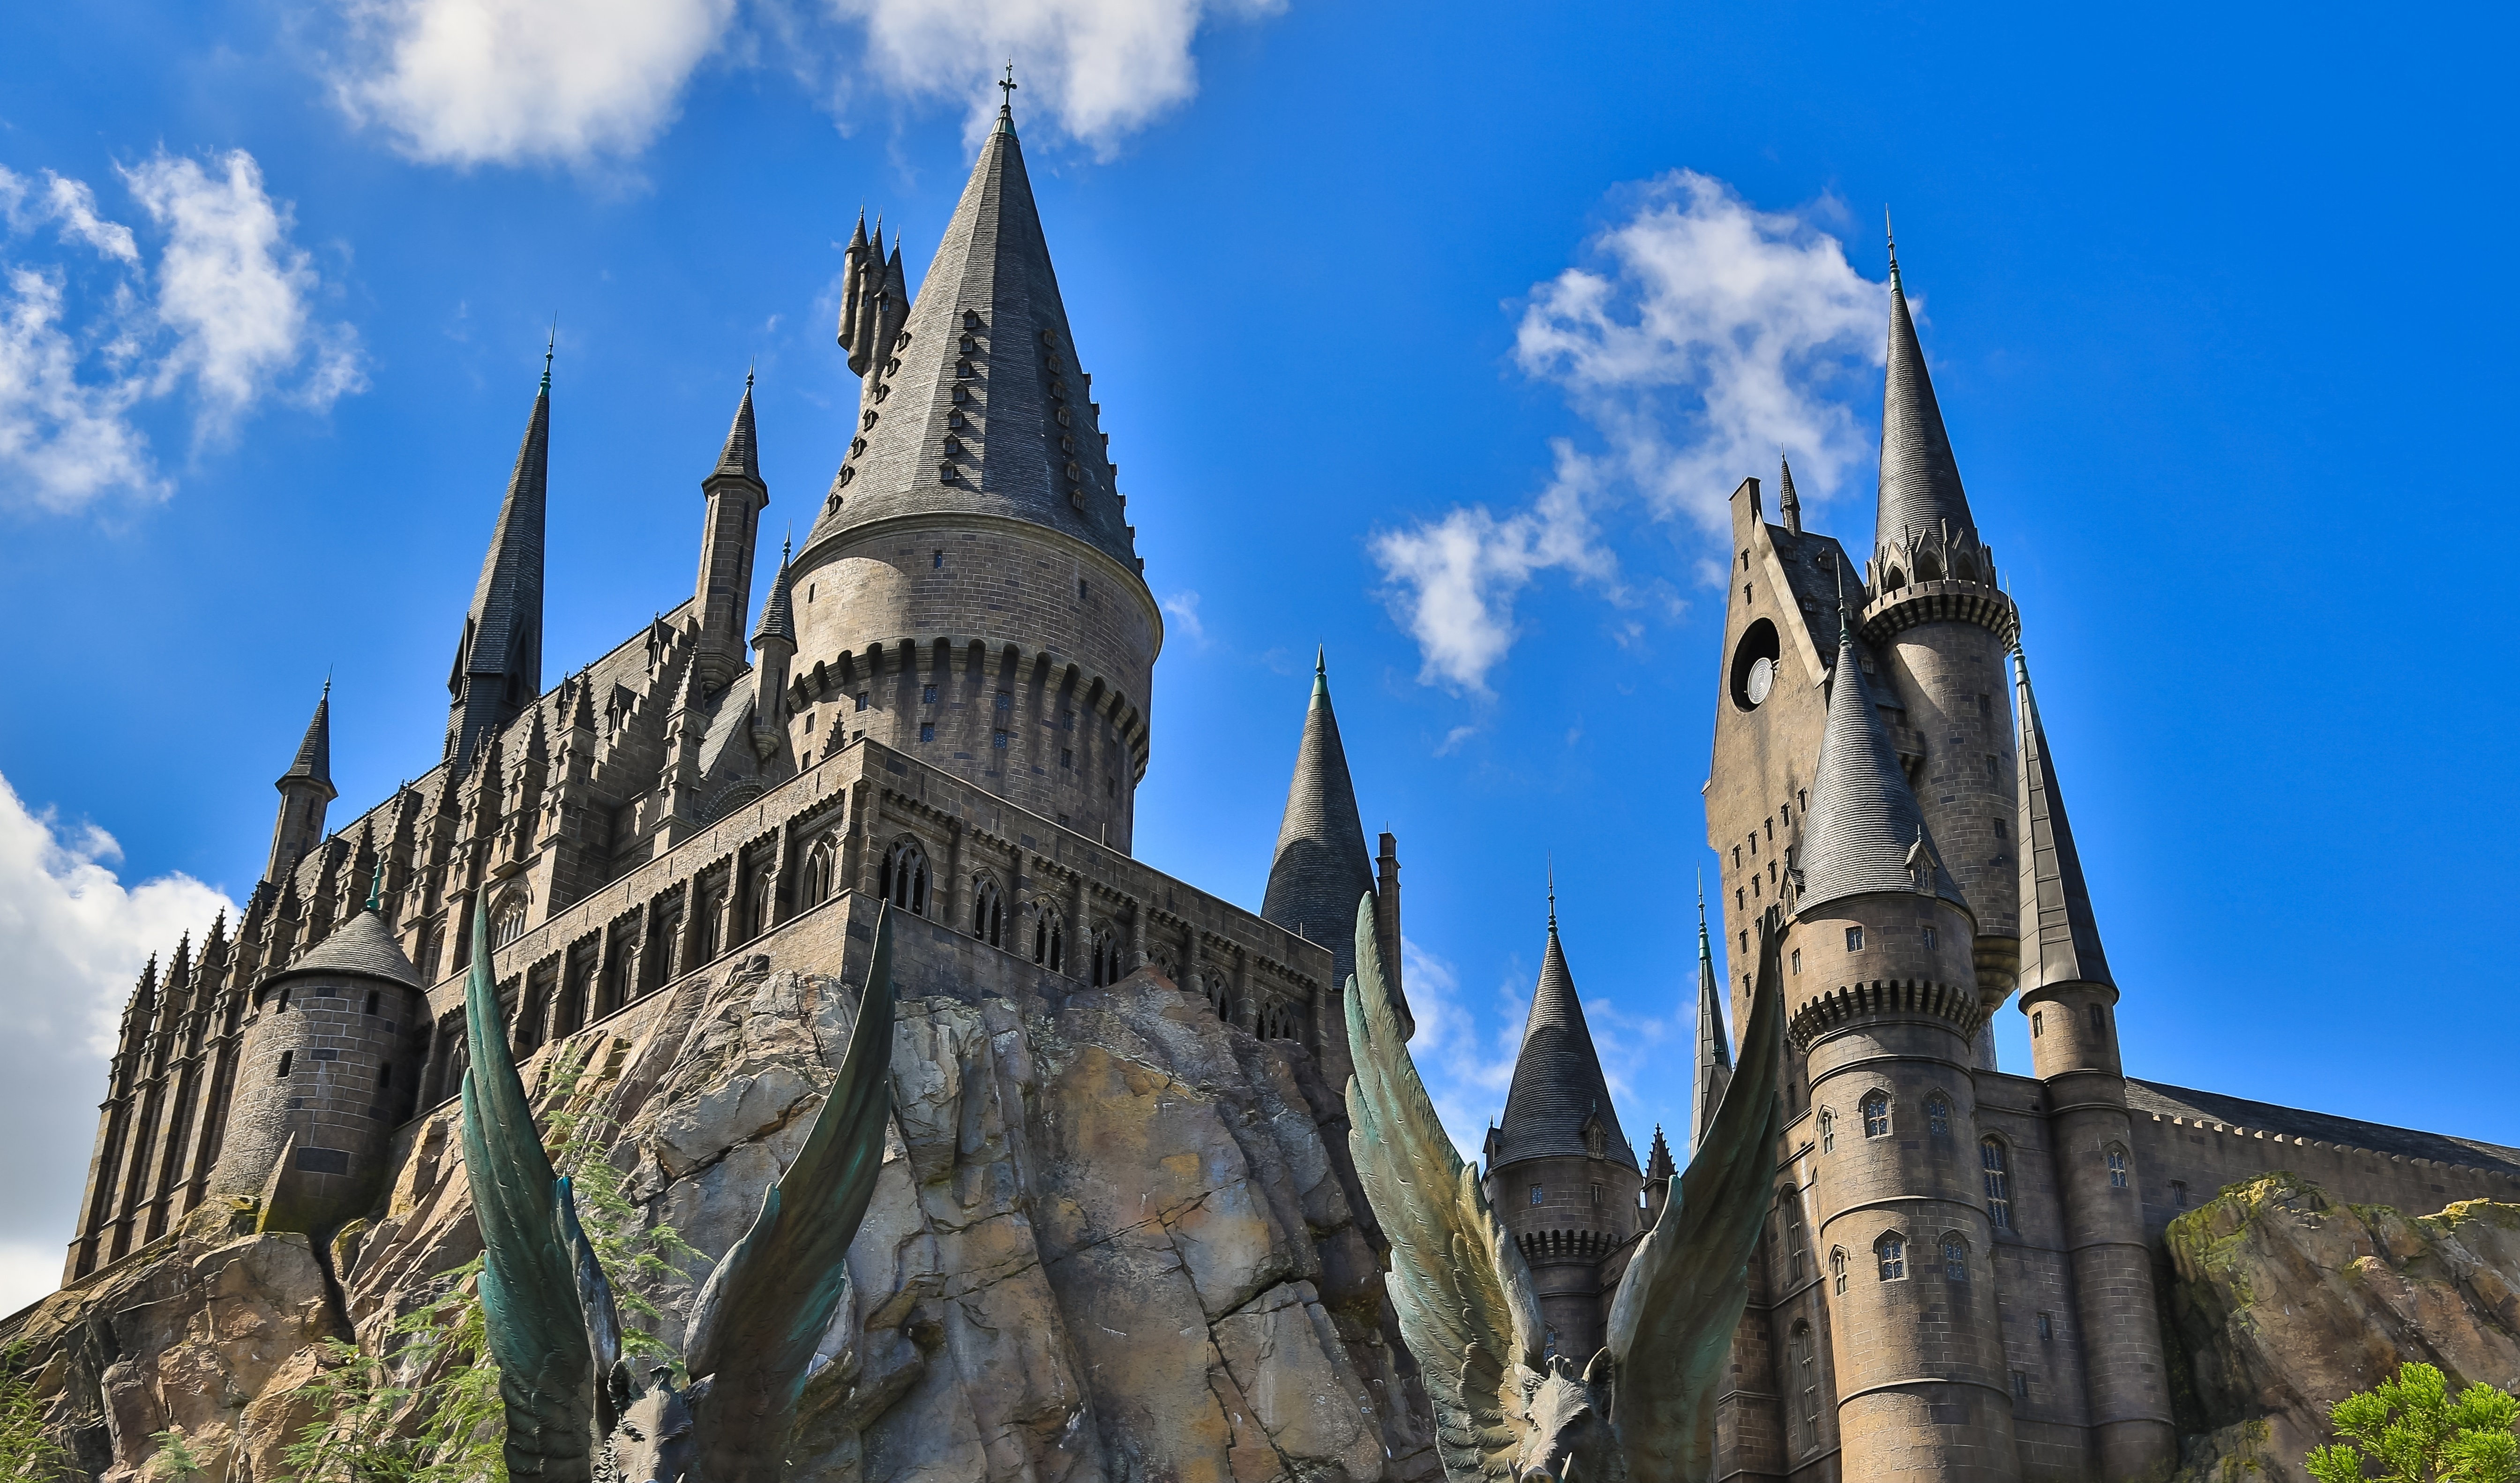 Harry Potter and the Forbidden Journey at Universal's Islands of